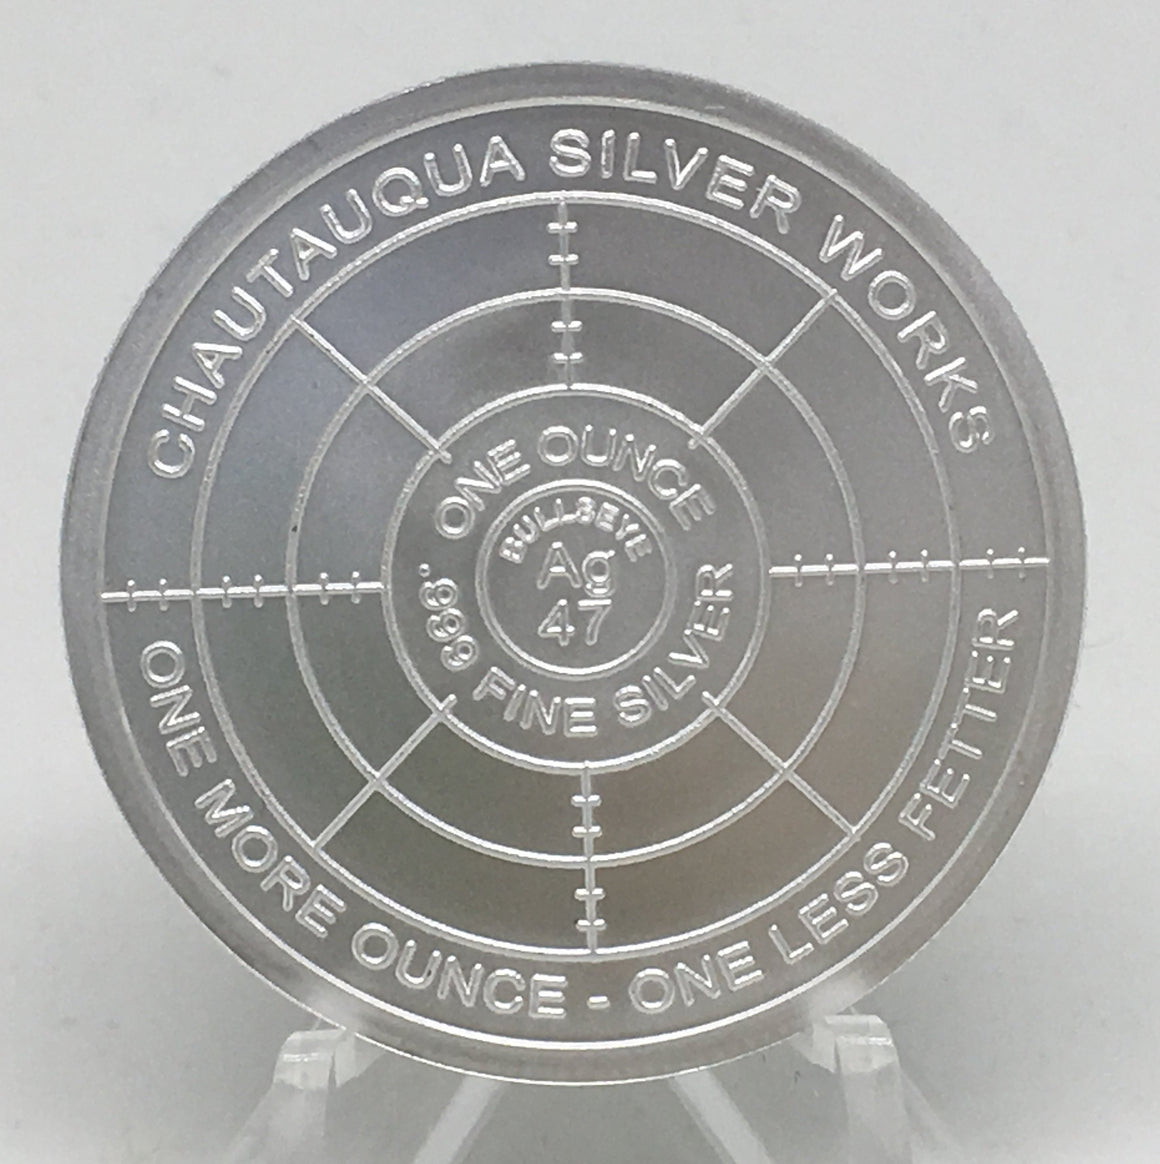 Cryptic Silver Series #1-Cryptic Quote, BU Finish by Chautauqua Silver Works, 1oz .999 Silver Round.